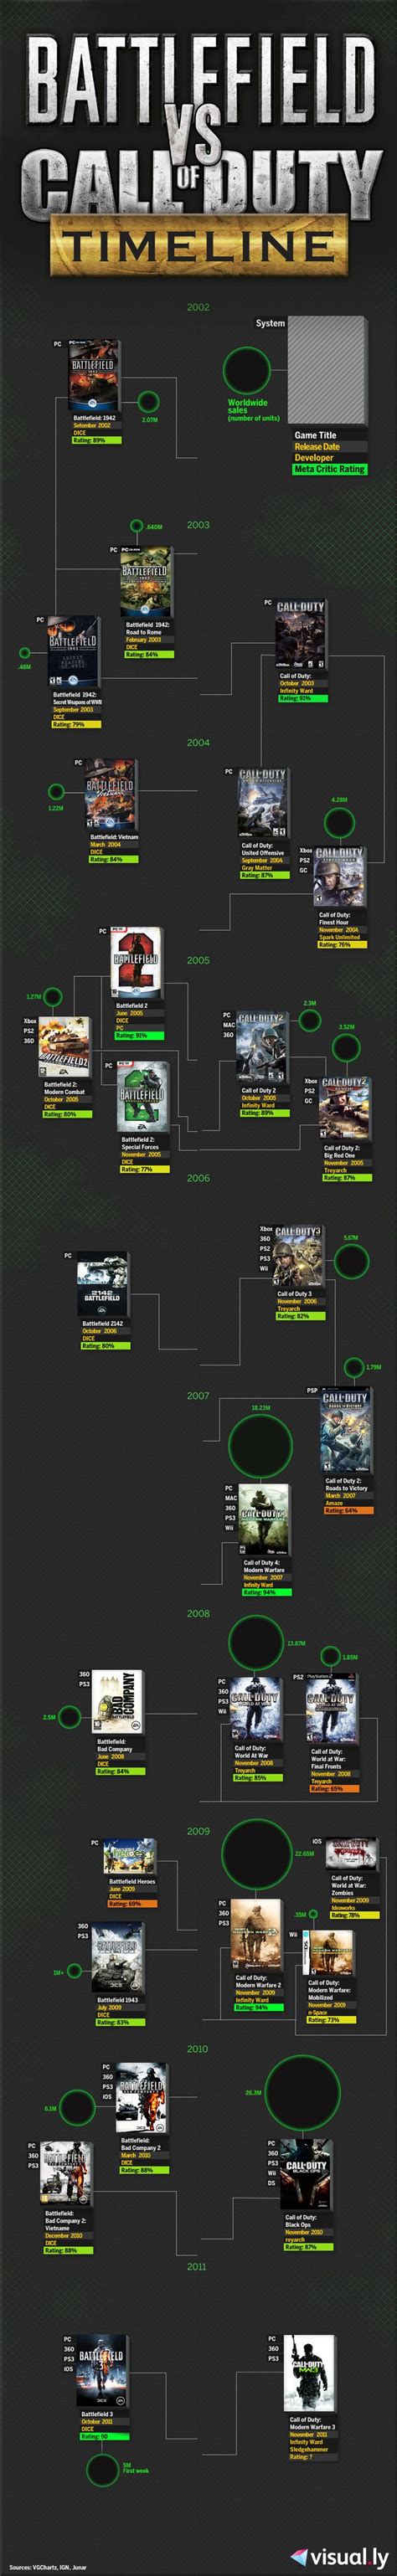 A History Of Battlefield Versus Call Of Duty Call Of Duty